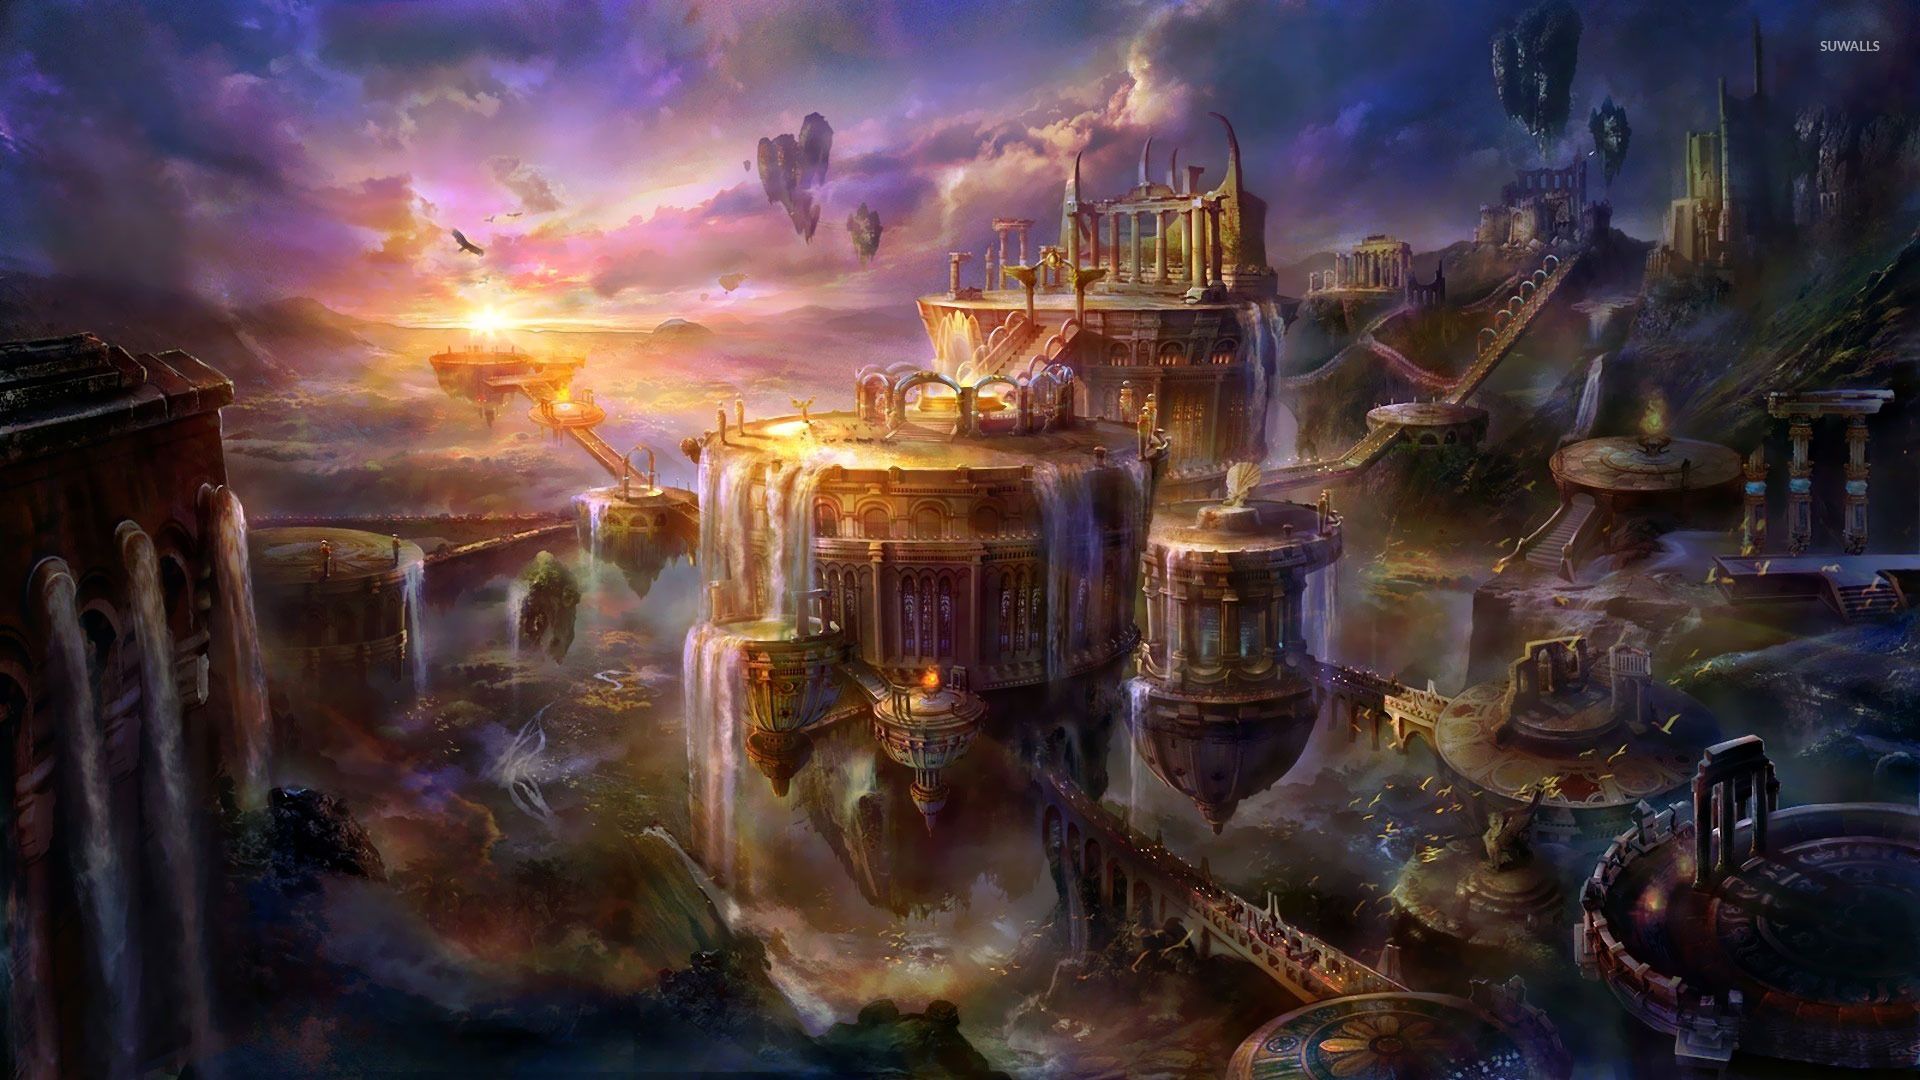 Floating City Wallpapers on